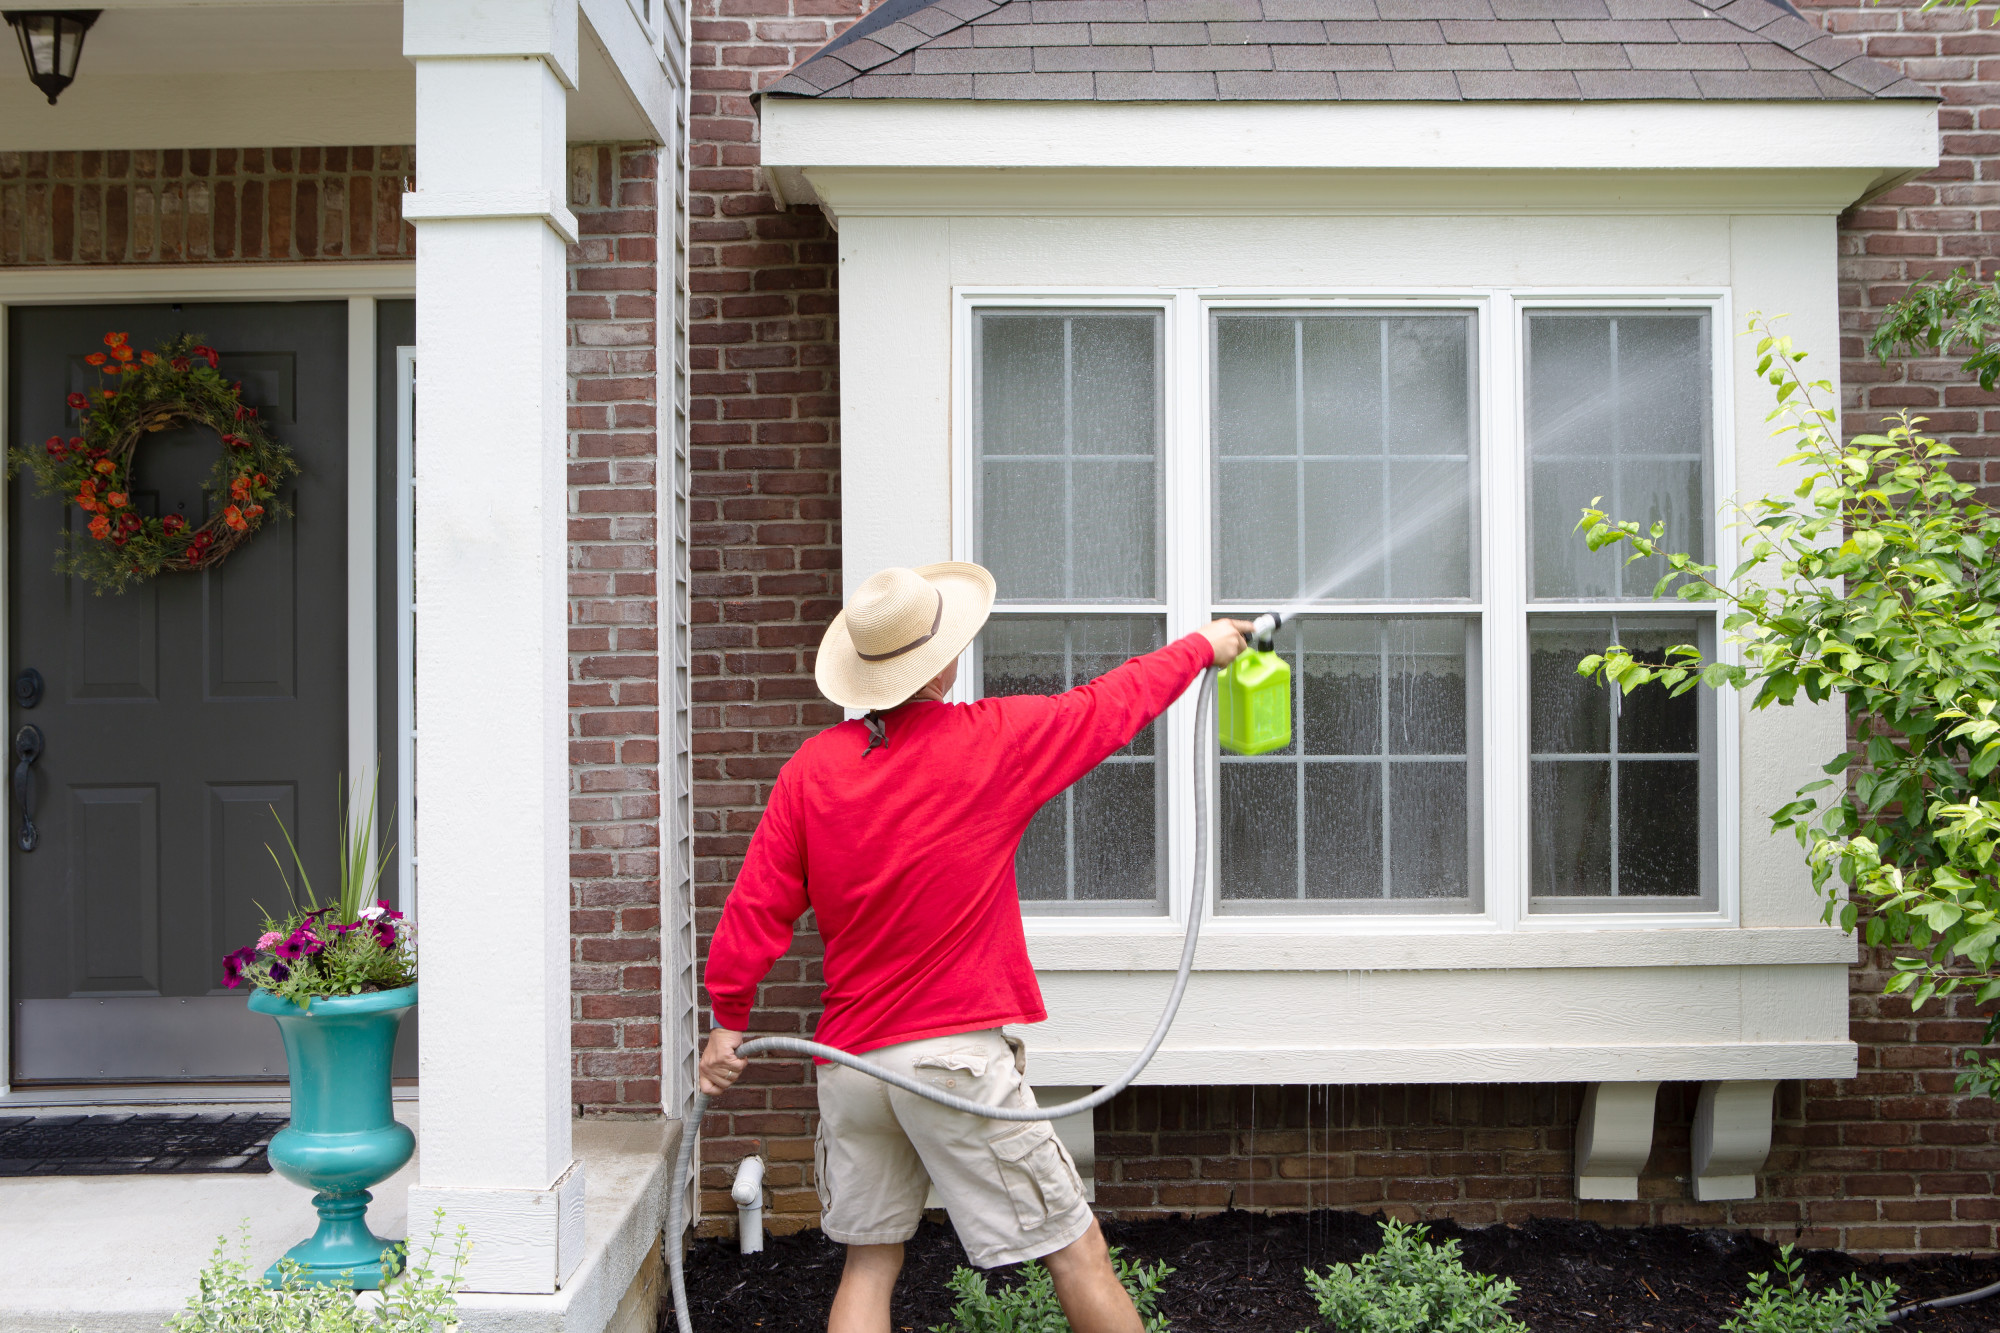 Do you need to spruce up the exterior of your home? Make the exterior of your home shine with the help of this exterior home cleaning checklist.